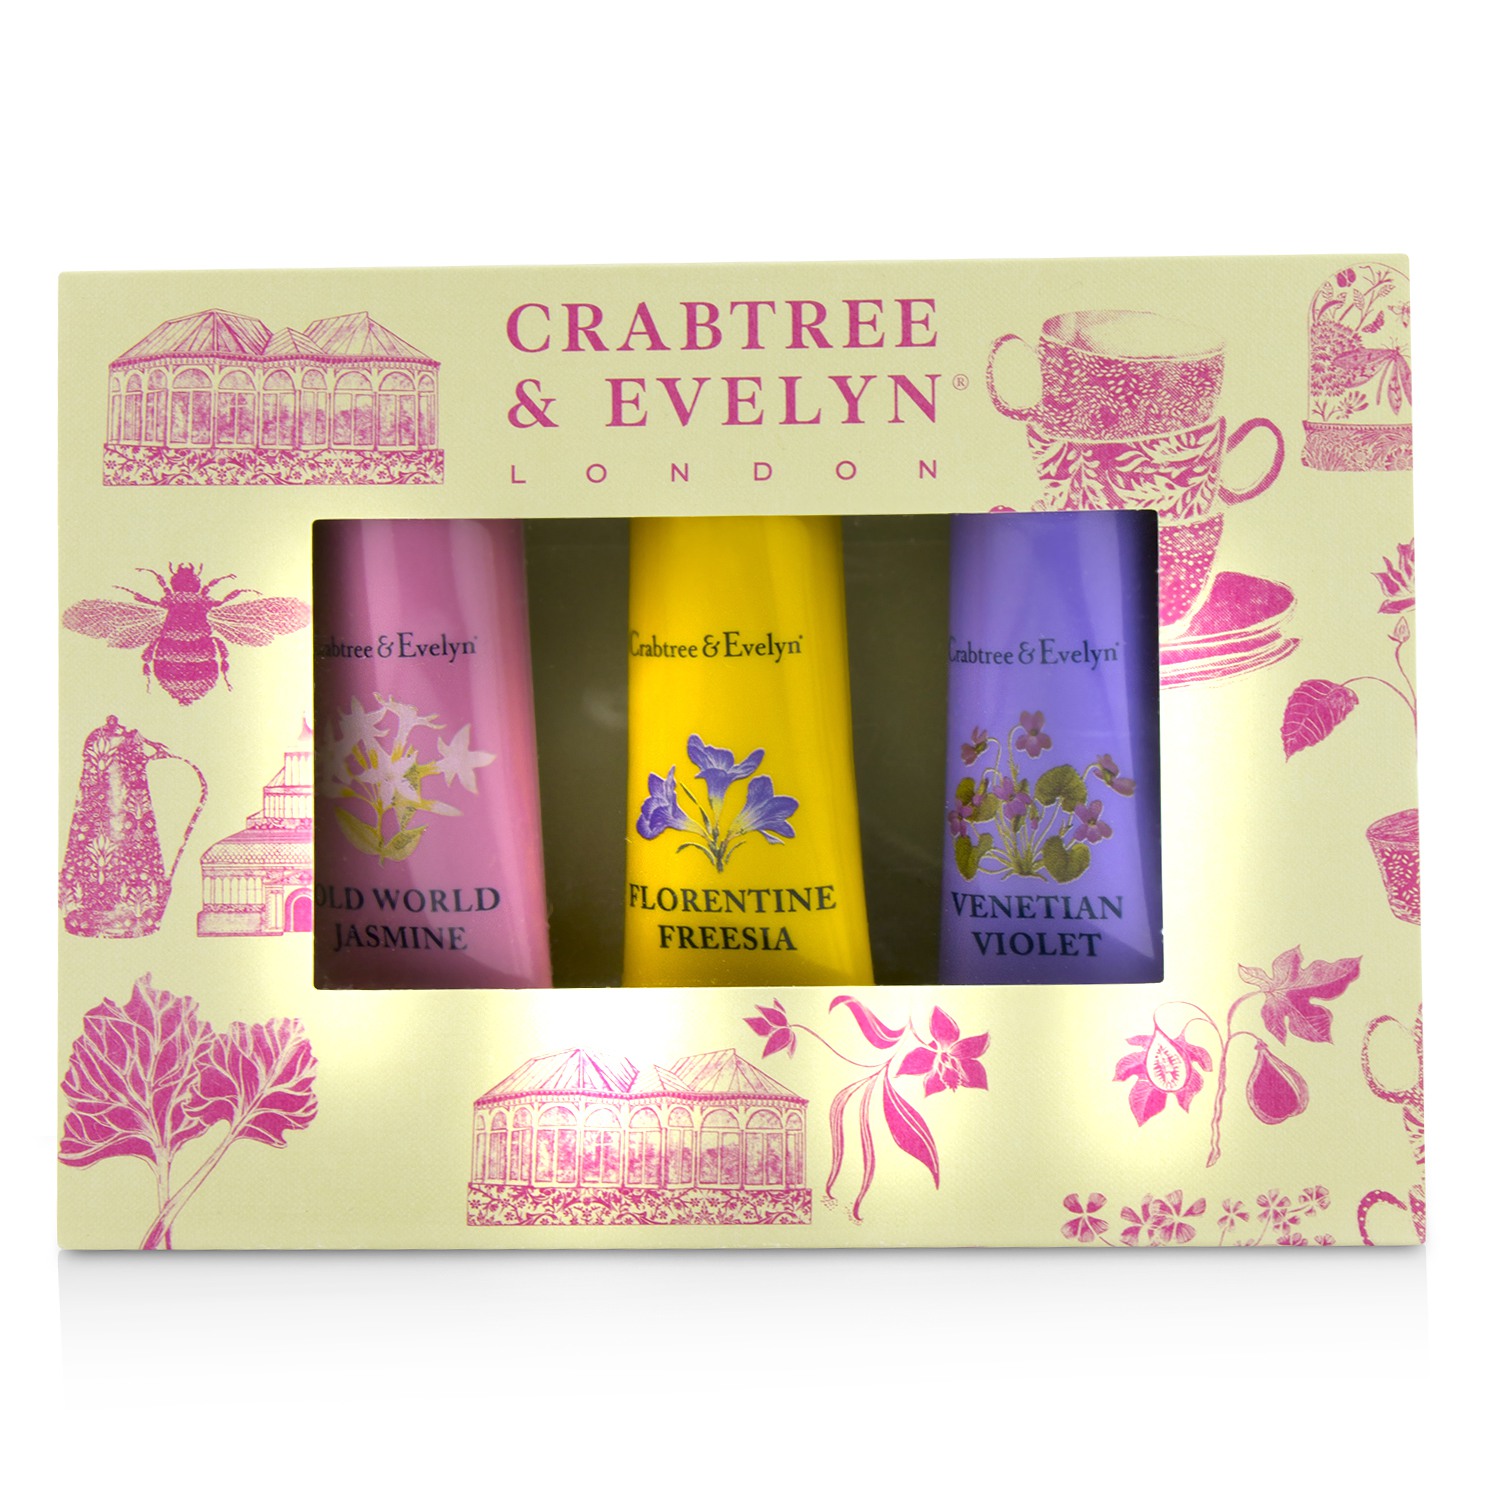 Heritage Hand Therapy Set (1x Old World Jasmine 1x Florentine Freesia 1x Venitian Violet) Crabtree & Evelyn Image